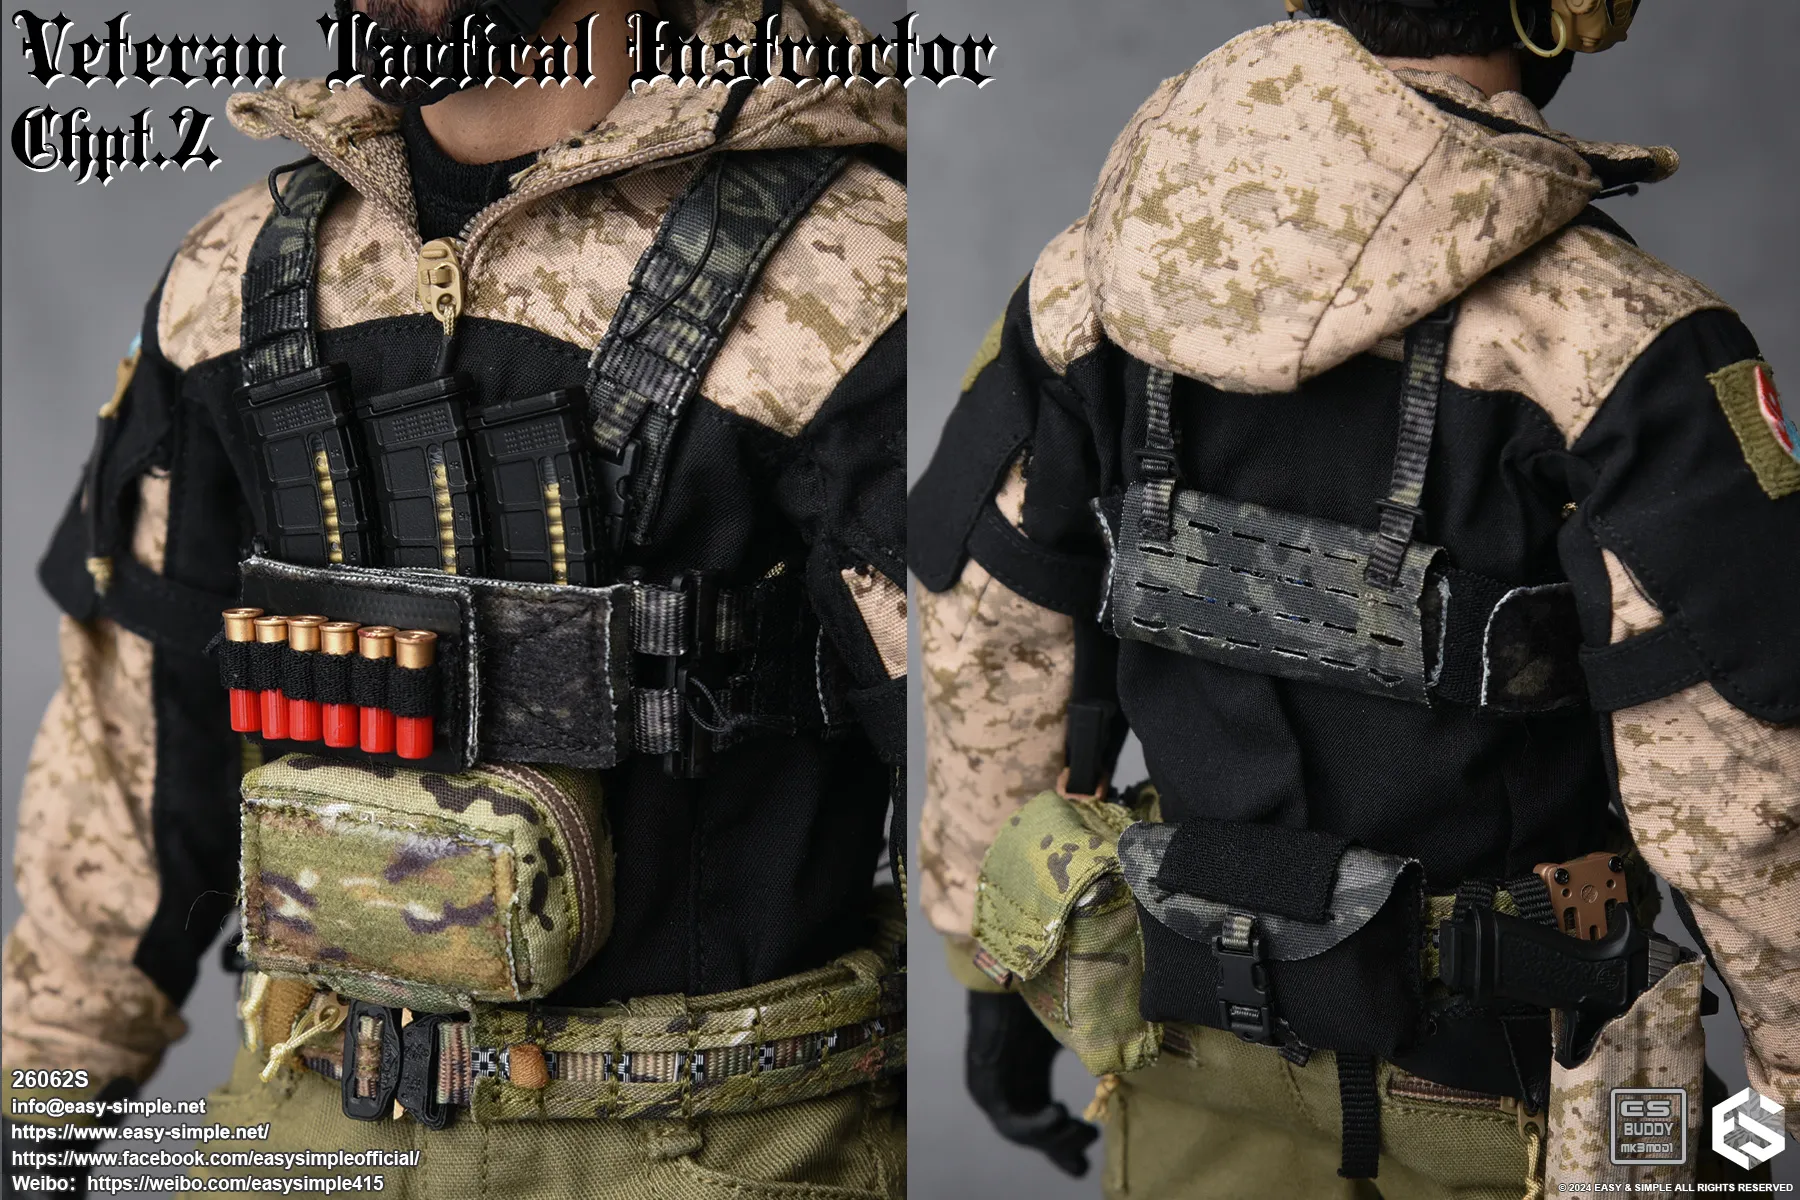 male - NEW PRODUCT: Easy & Simple Veteran Tactical Instructor Chapter II 26062S Format,webp